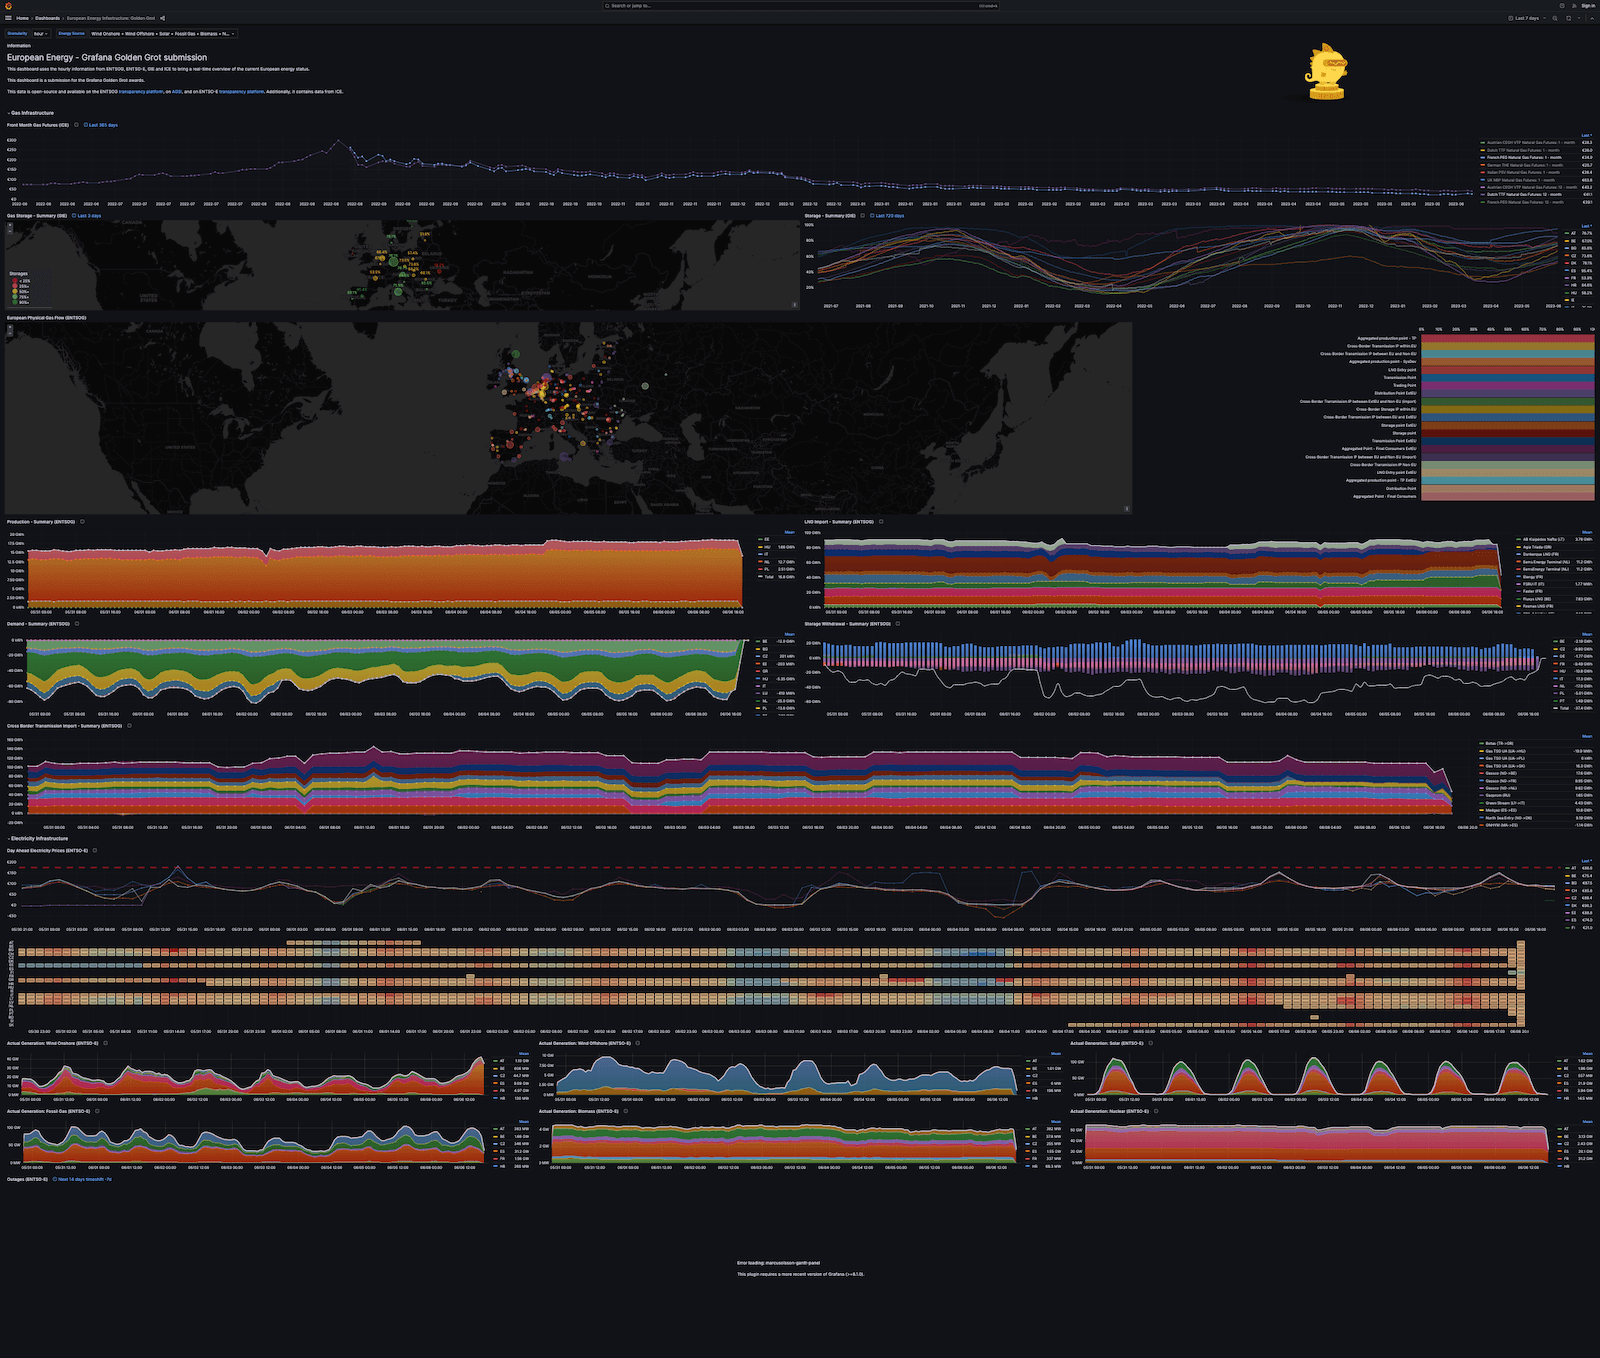 A screenshot of a Grafana dashboard visualizing data with colorful graphs in different panels.